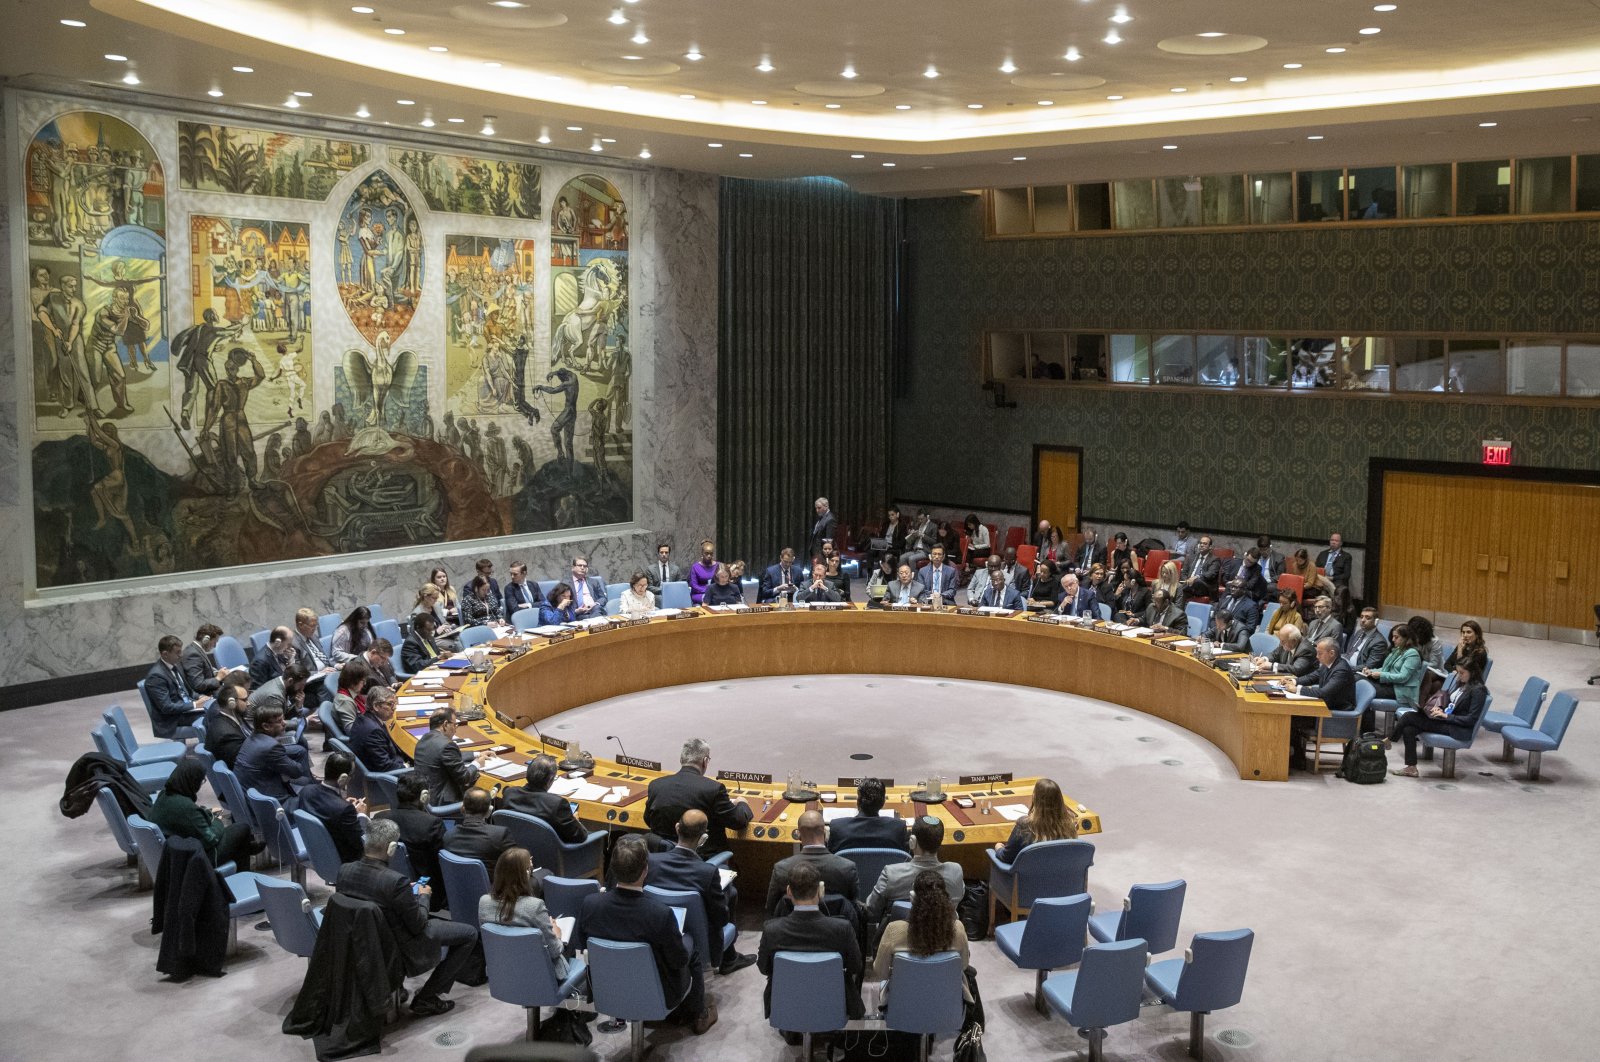 The U.N. Security Council holds a meeting at the United Nations headquarters, Nov. 20, 2019. (AP Photo)